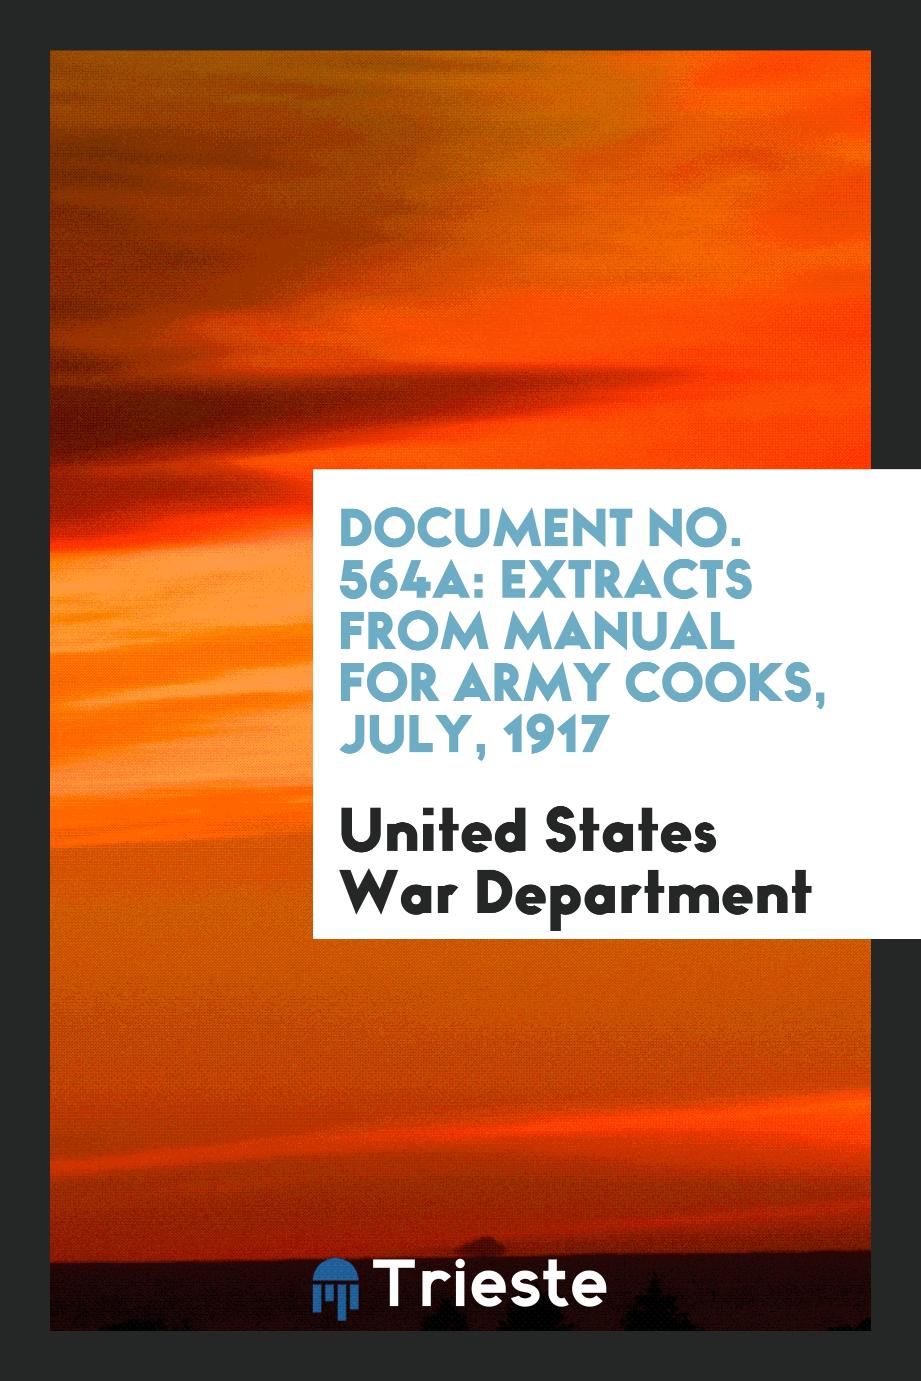 Document No. 564A: Extracts from Manual for Army Cooks, July, 1917